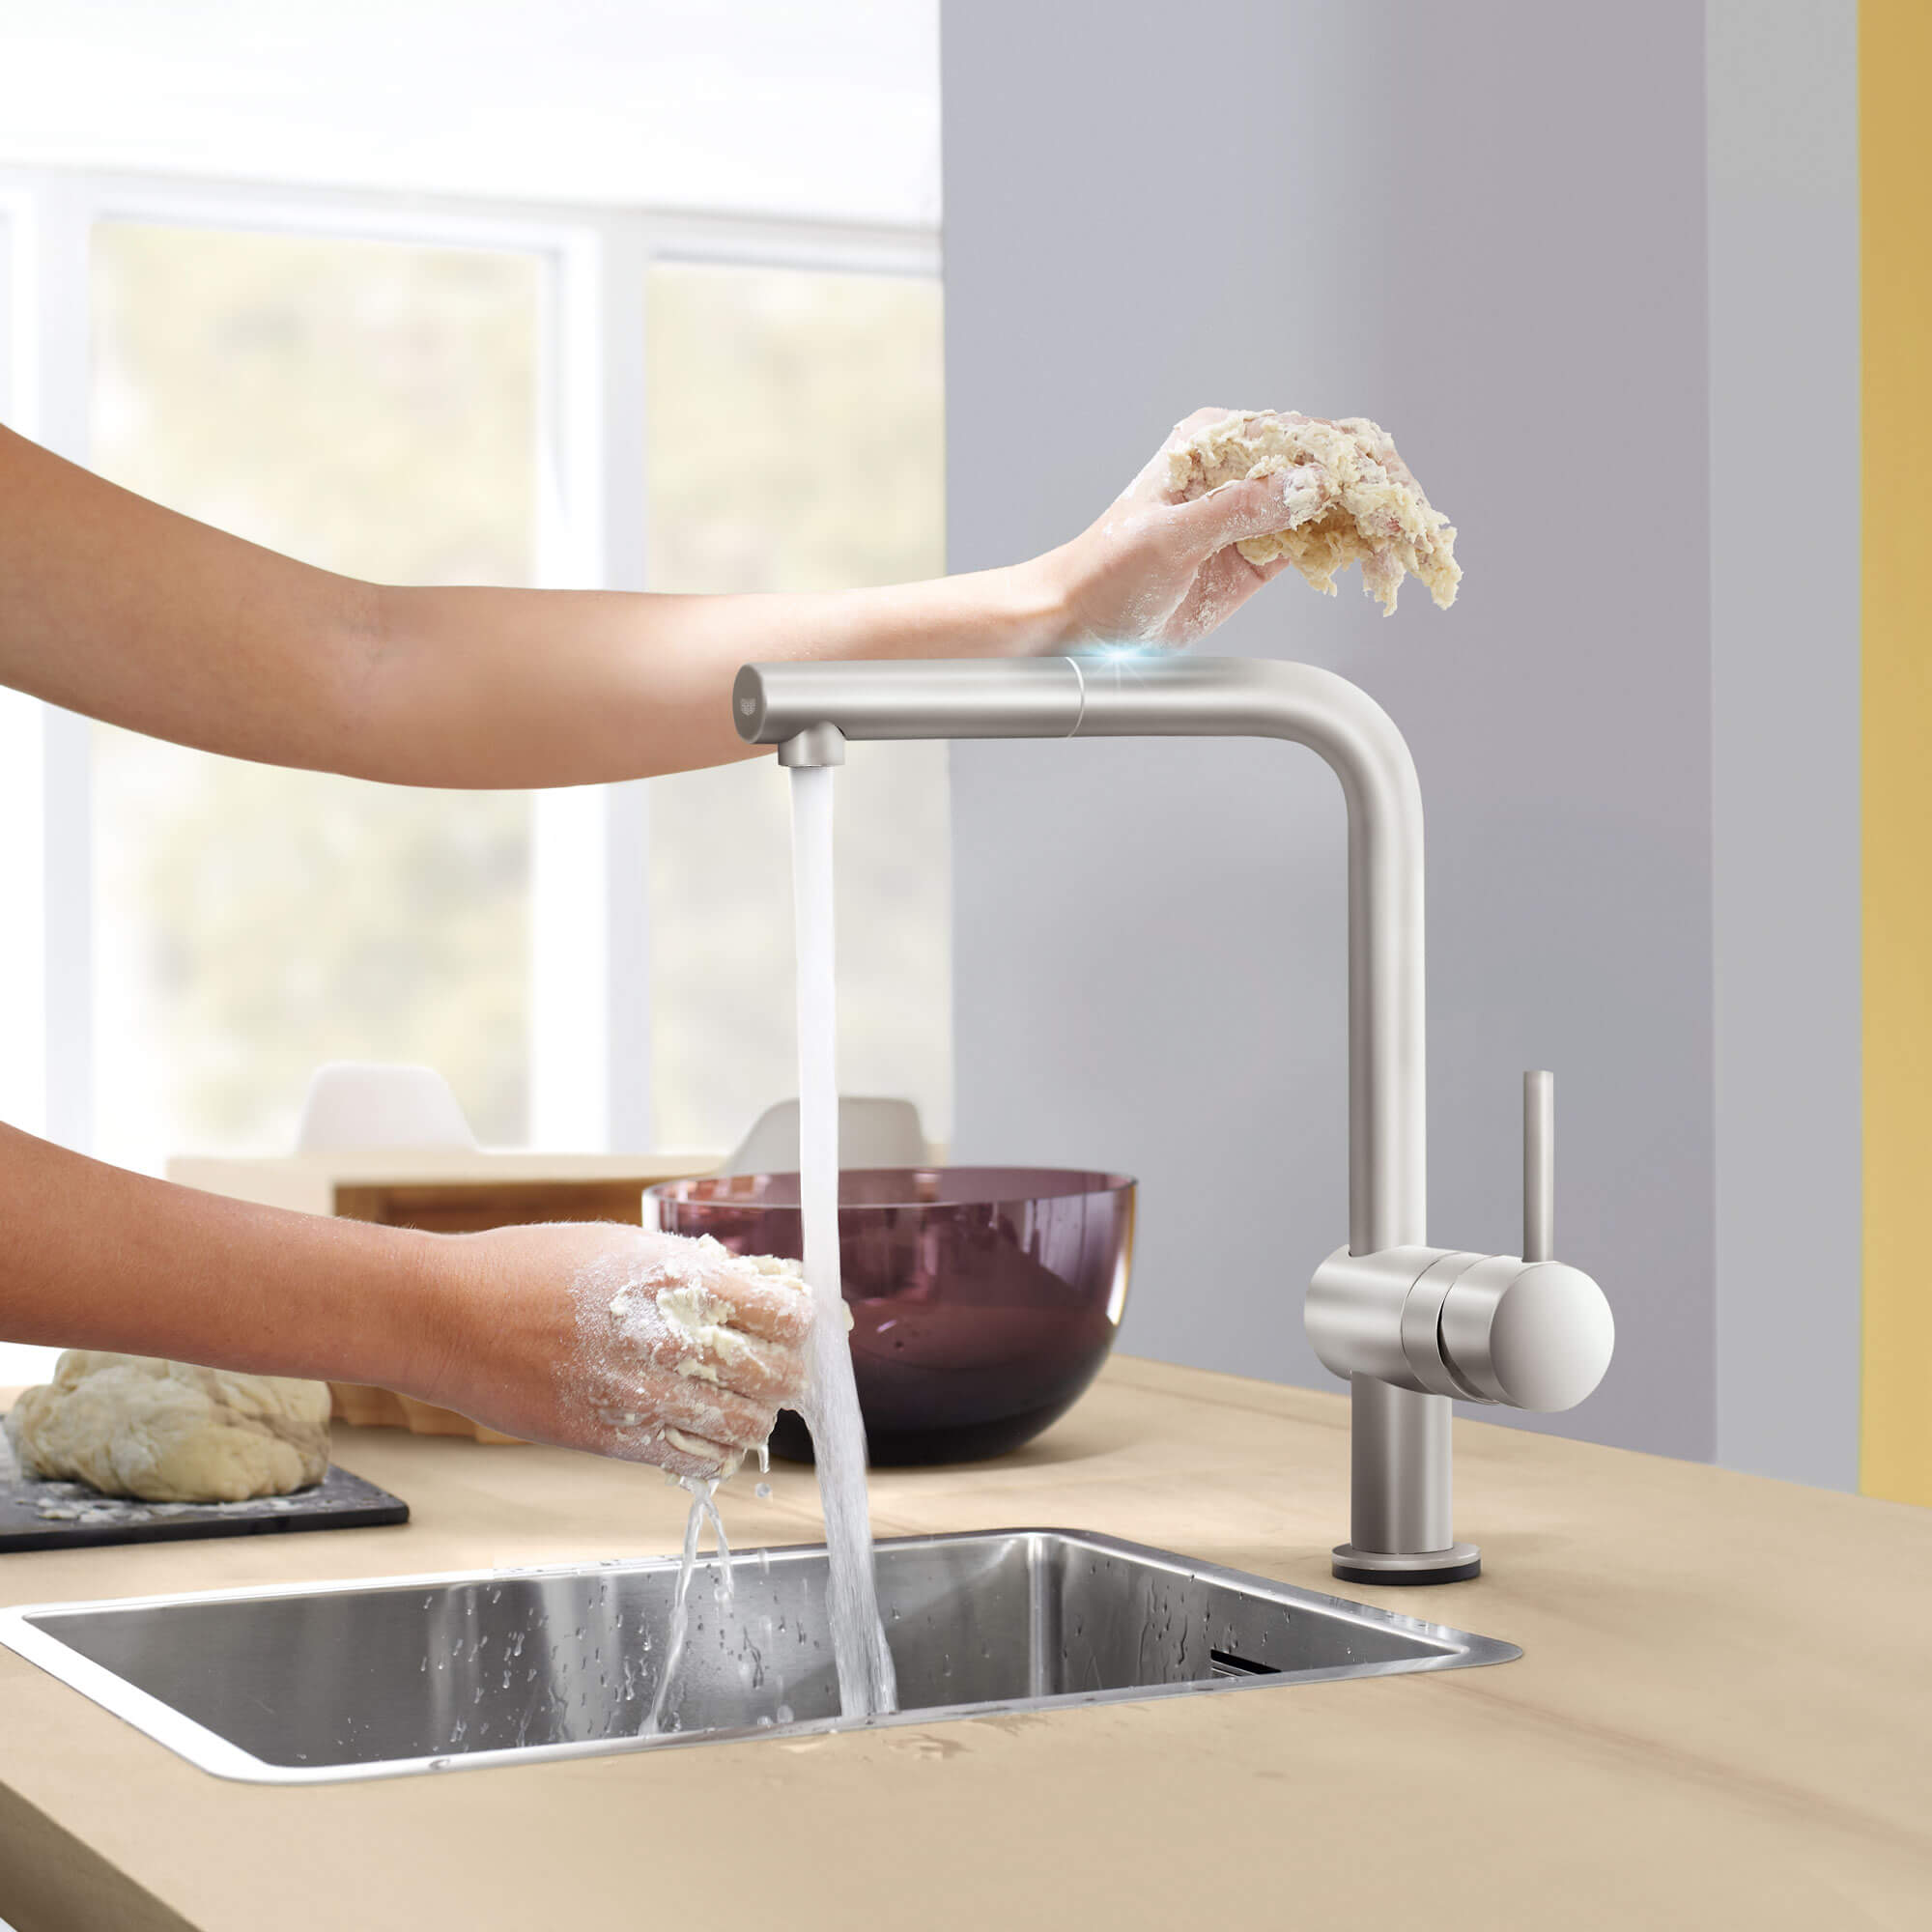 Arm using touch function for Minta Touch kitchen faucet to turn on running water